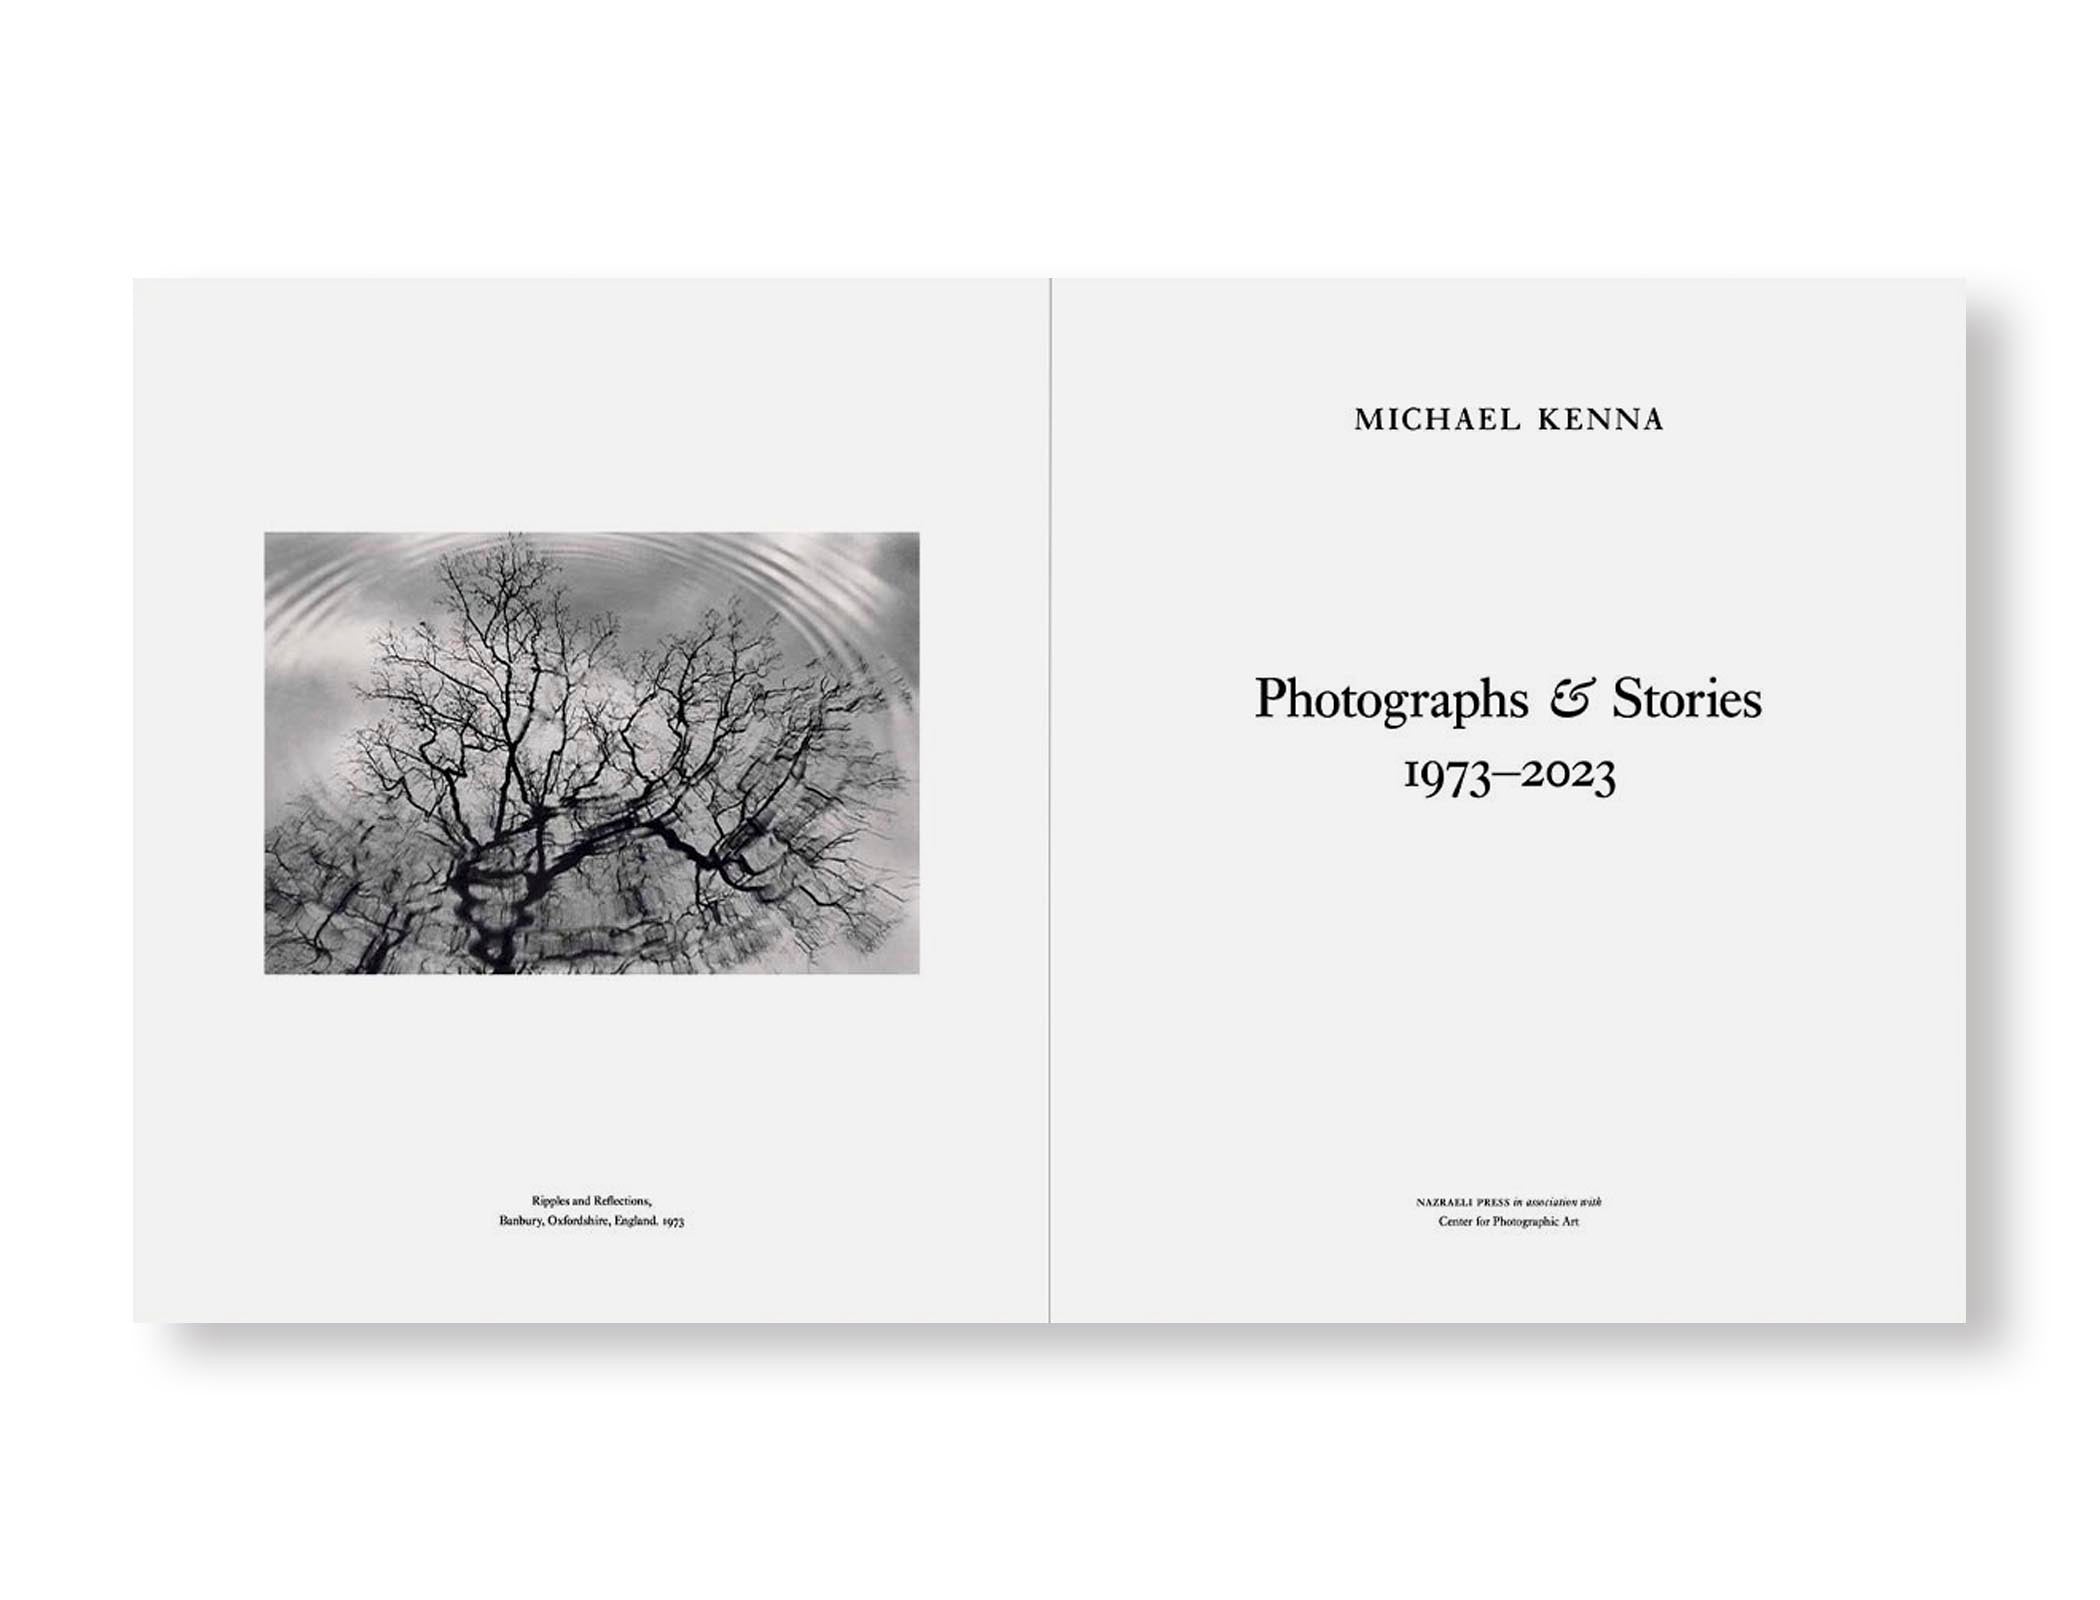 PHOTOGRAPHS AND STORIES by Michael Kenna